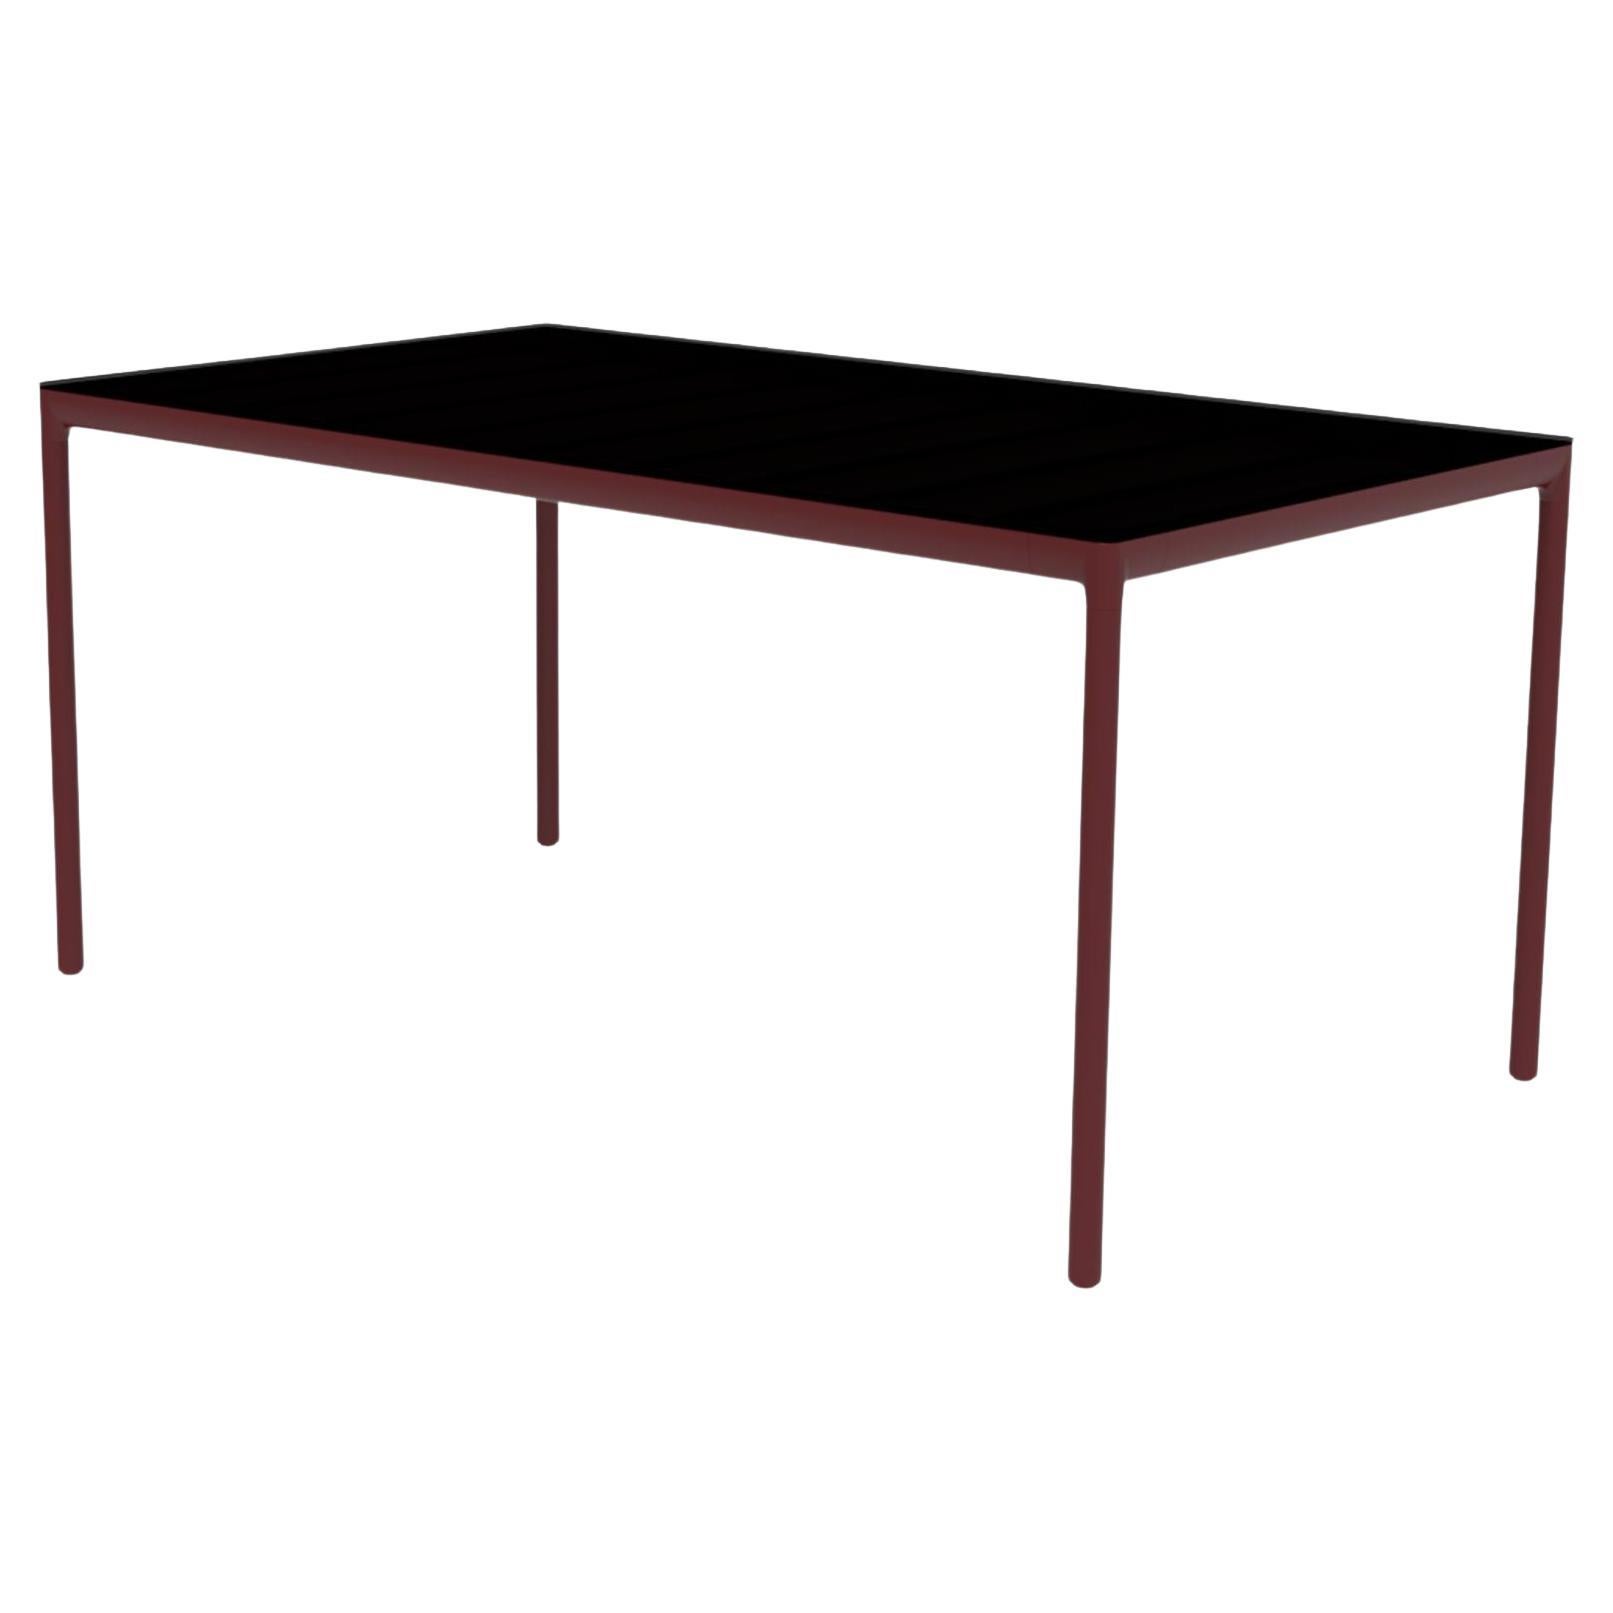 Ribbons Burgundy 160 Coffee Table by Mowee For Sale